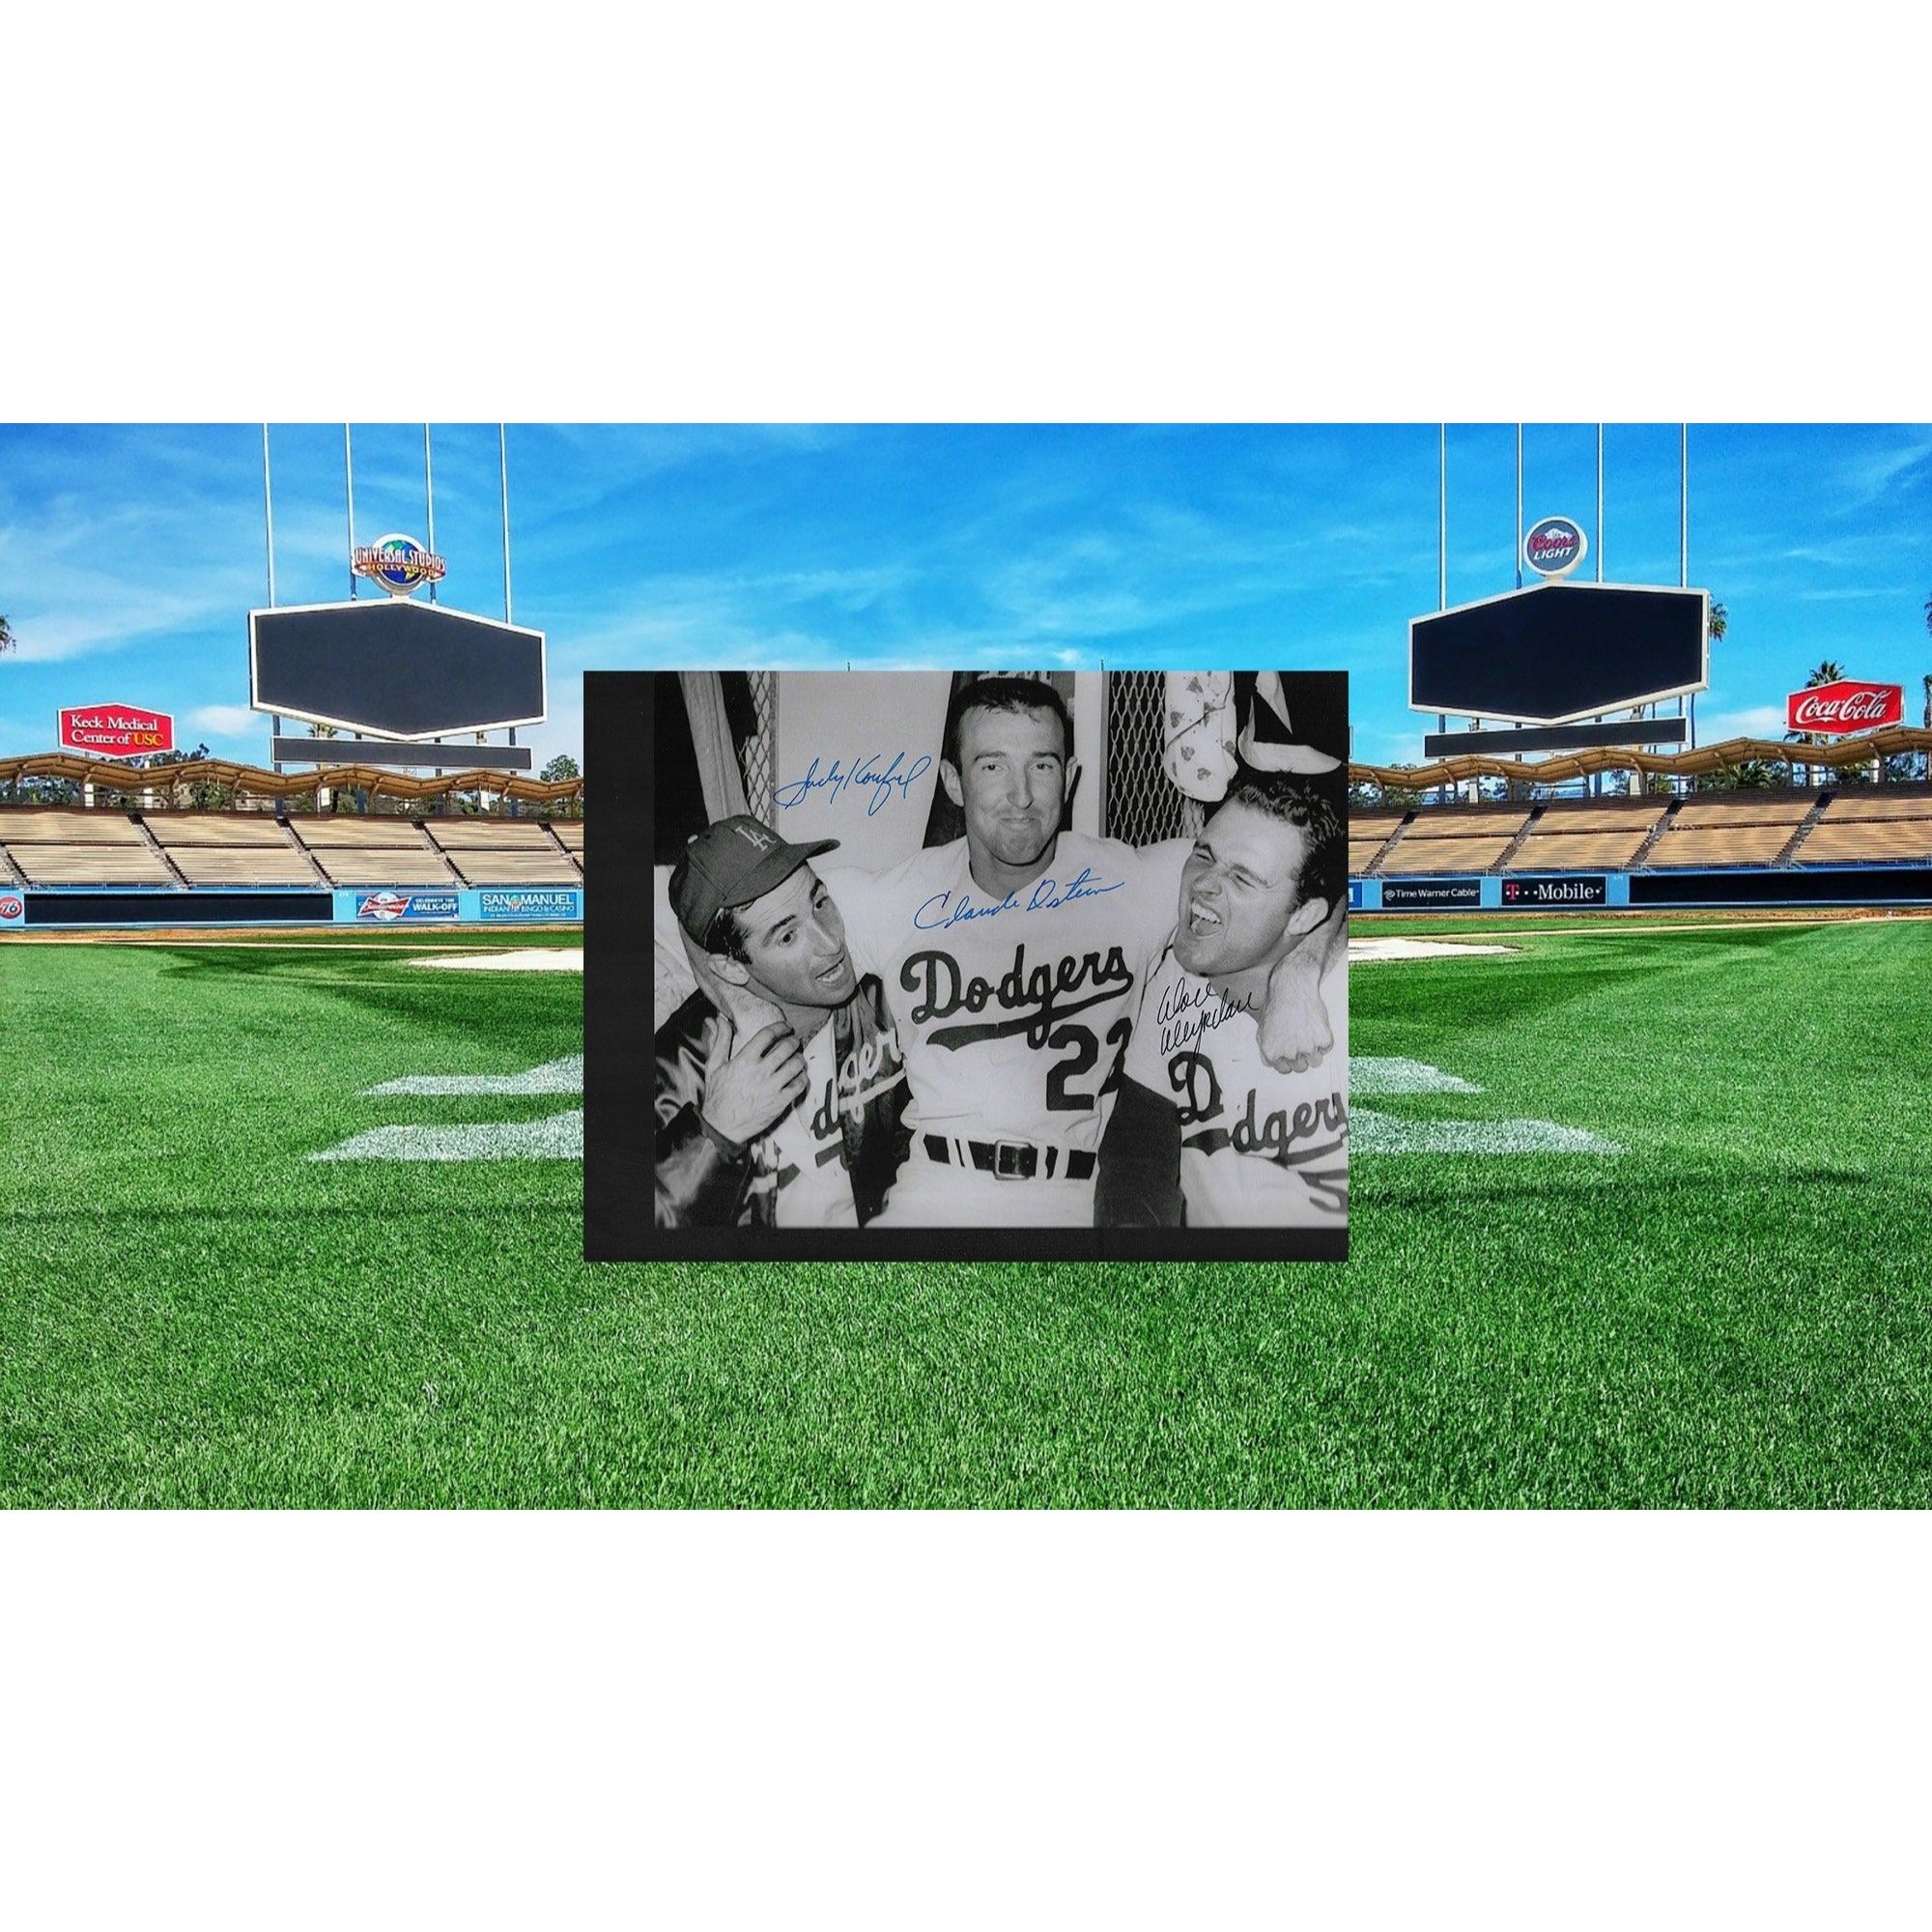 Sandy Koufax, Cloud Osteen and Don Drysdale 8 by 10 signed photo